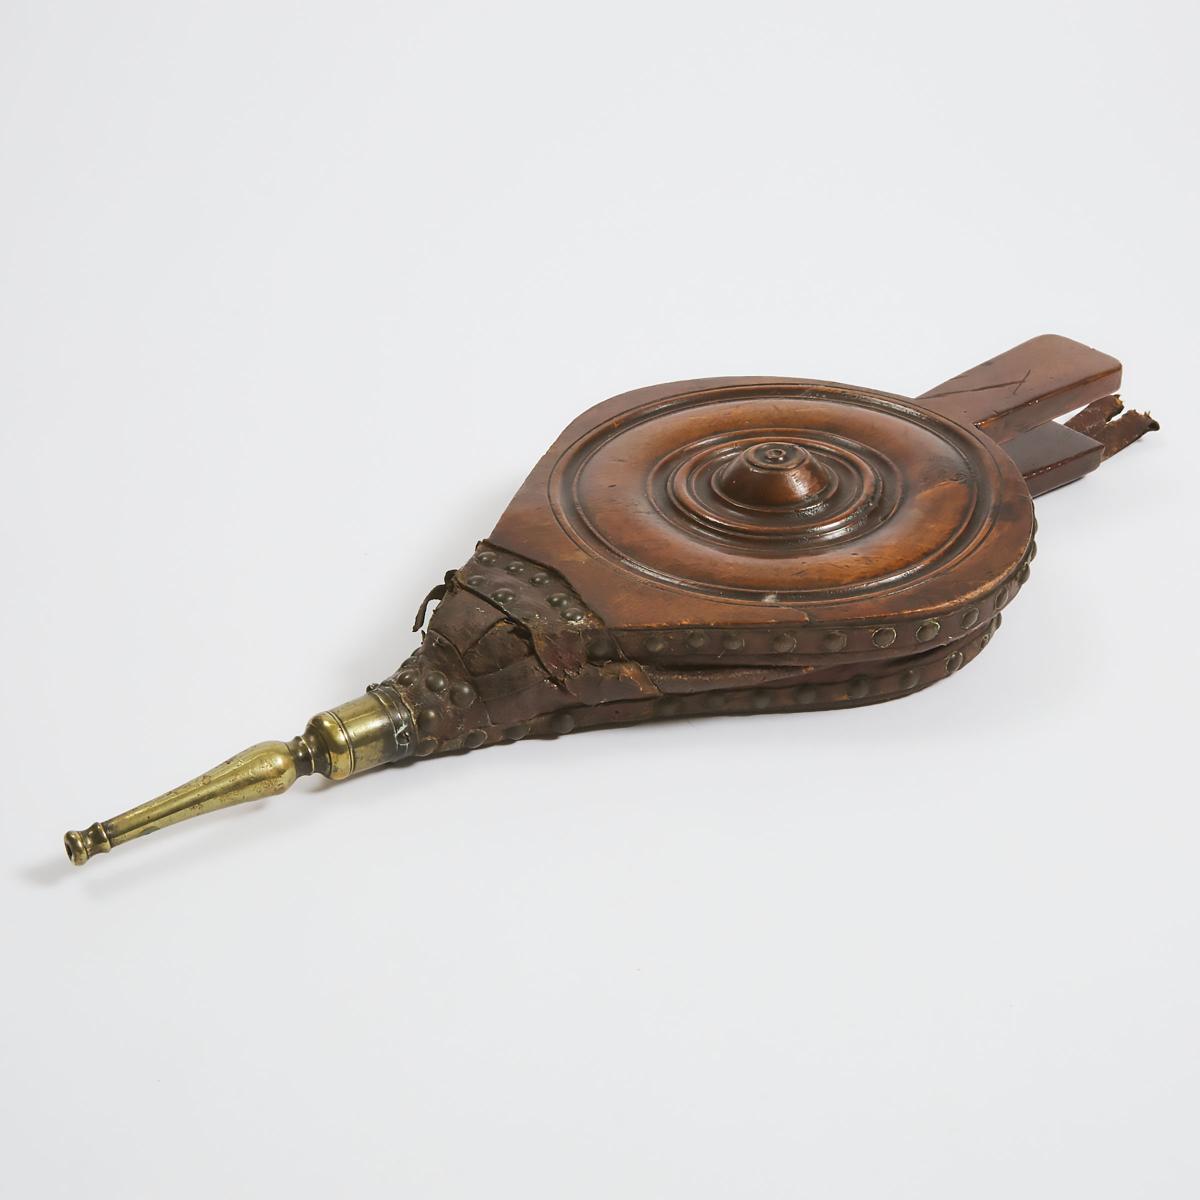 Set of English Oak, Brass and Leather Bellows, early 19th century, length 19 in — 48.3 cm